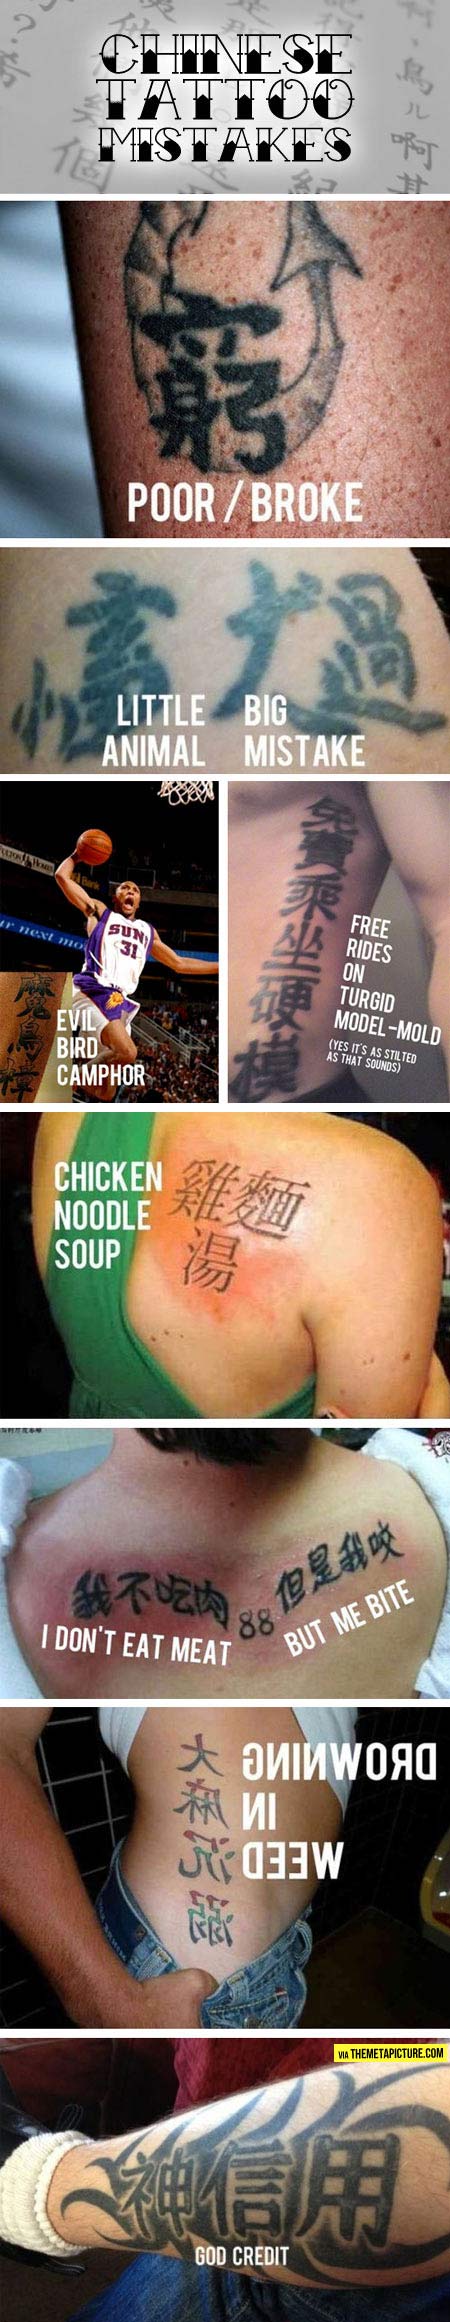 funny-Chinese-tattoo-mistakes